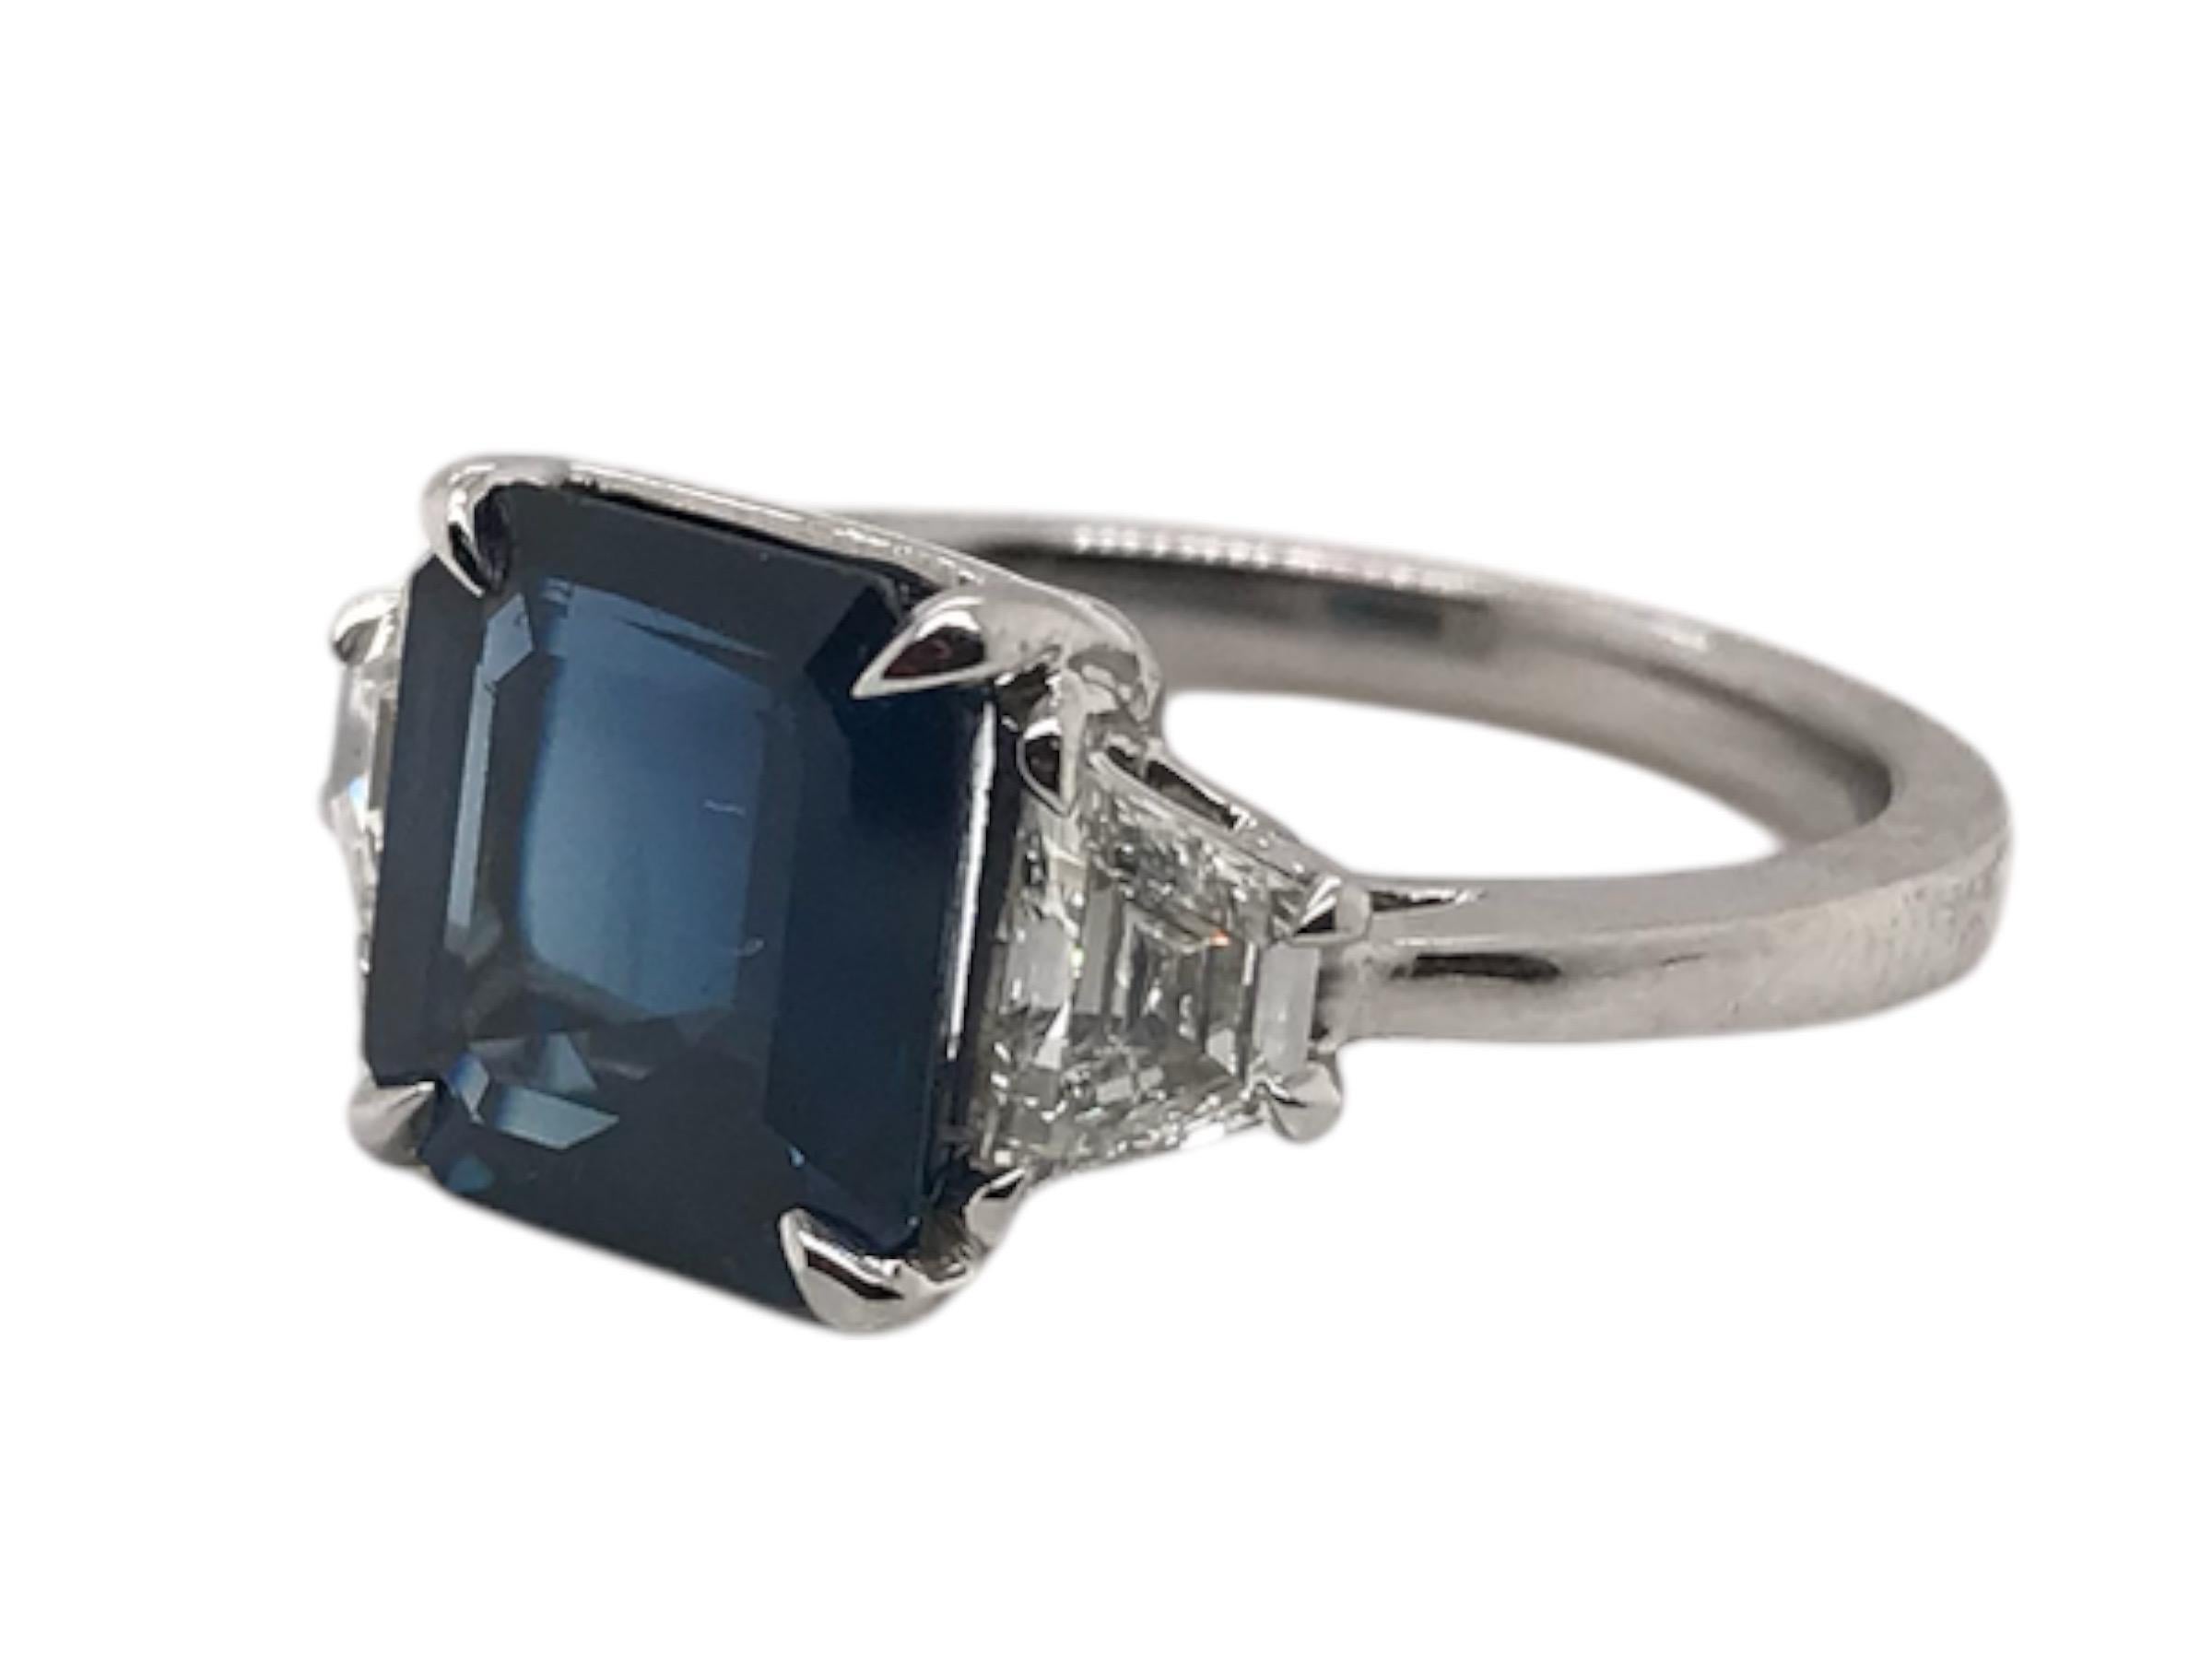 We love classic pieces such as this!
This lovely ring was custom made in platinum to showcase the beautiful combination of a midnight blue sapphire & vibrant white trapezoid cut diamonds.

Sapphire:
9.39mm X 8.72mm X 5.22mm Step Cut
Weight: 4.40